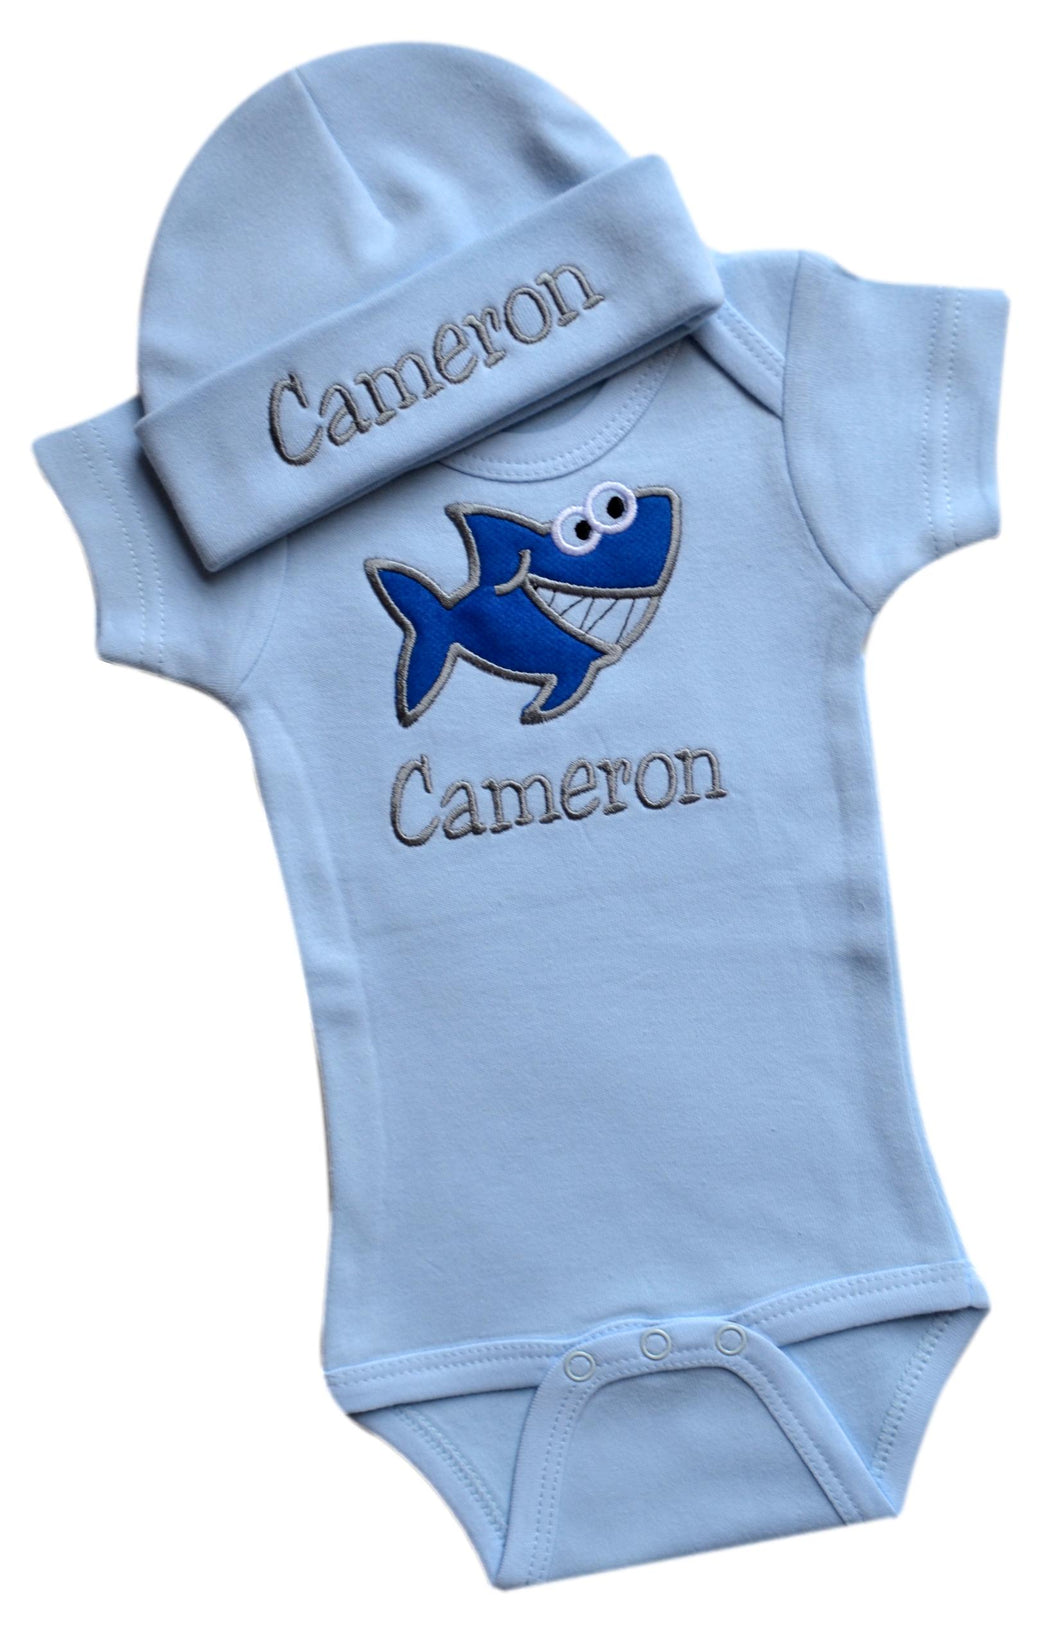 Personalized Embroidered Baby Shark Bodysuit with Matching Cotton Beanie Hat